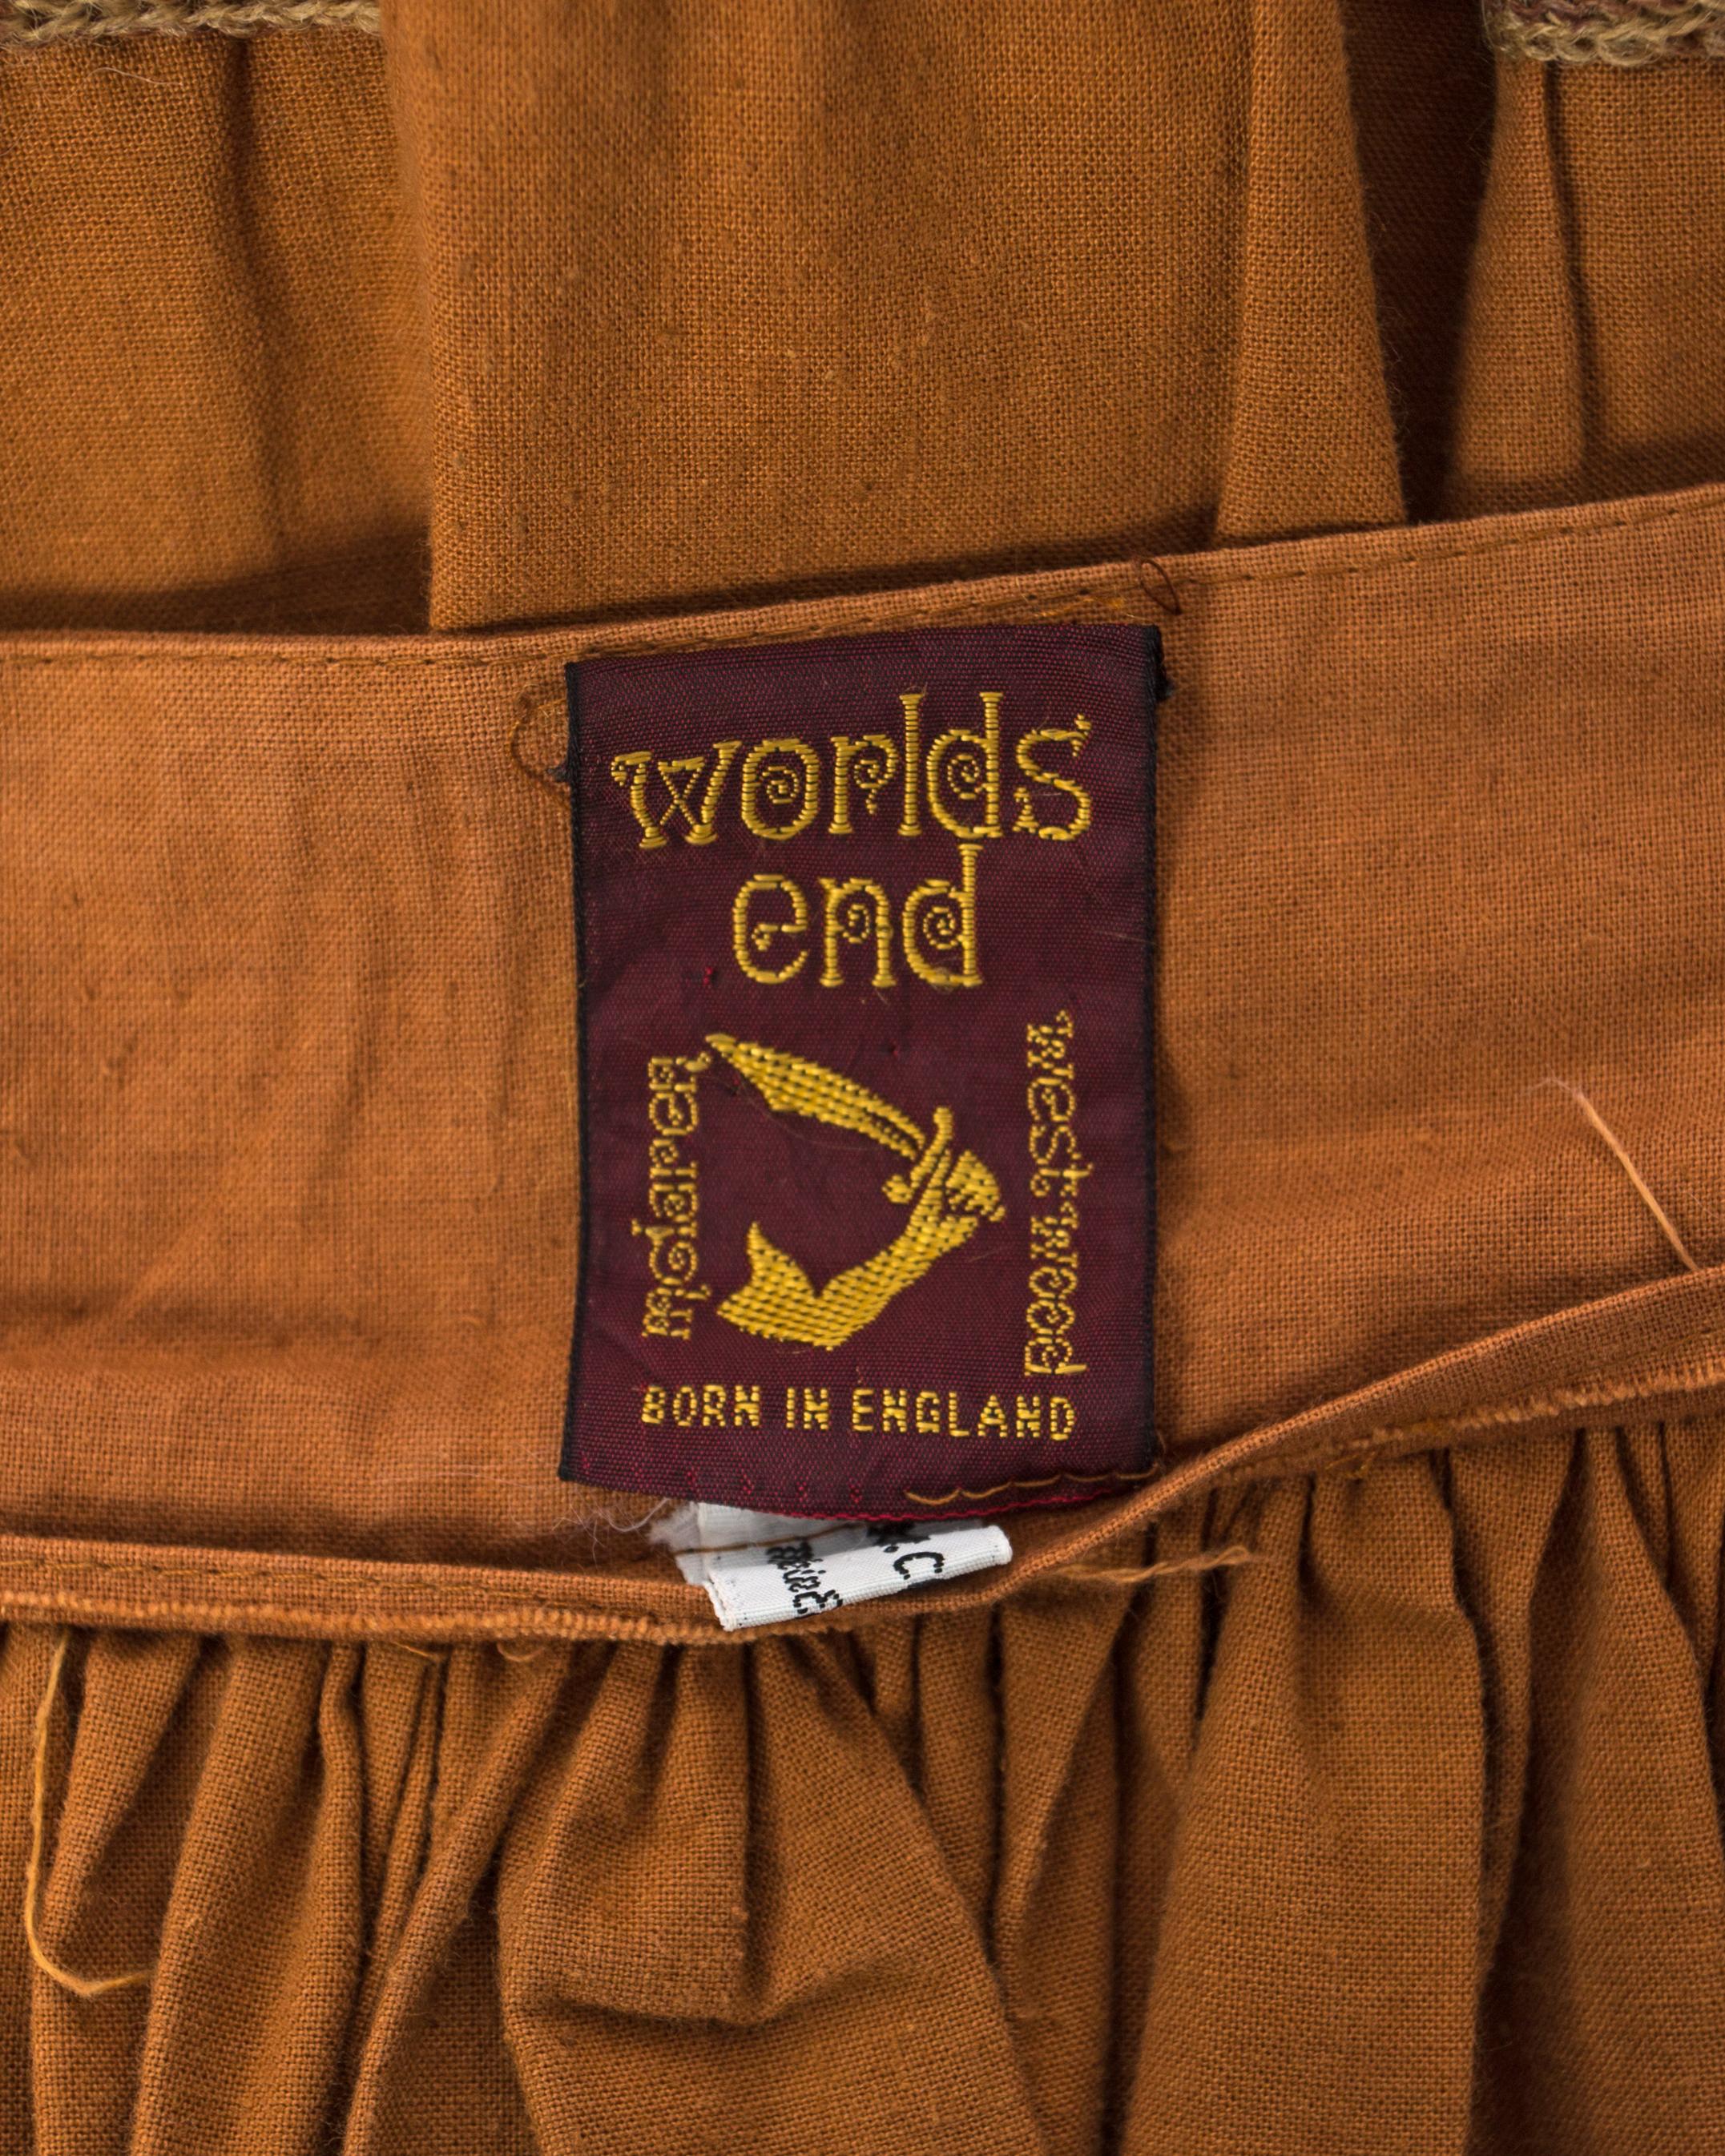 Women's or Men's Worlds End, Cotton screen printed wrap skirt, Nostalgia of Mud AW 1982